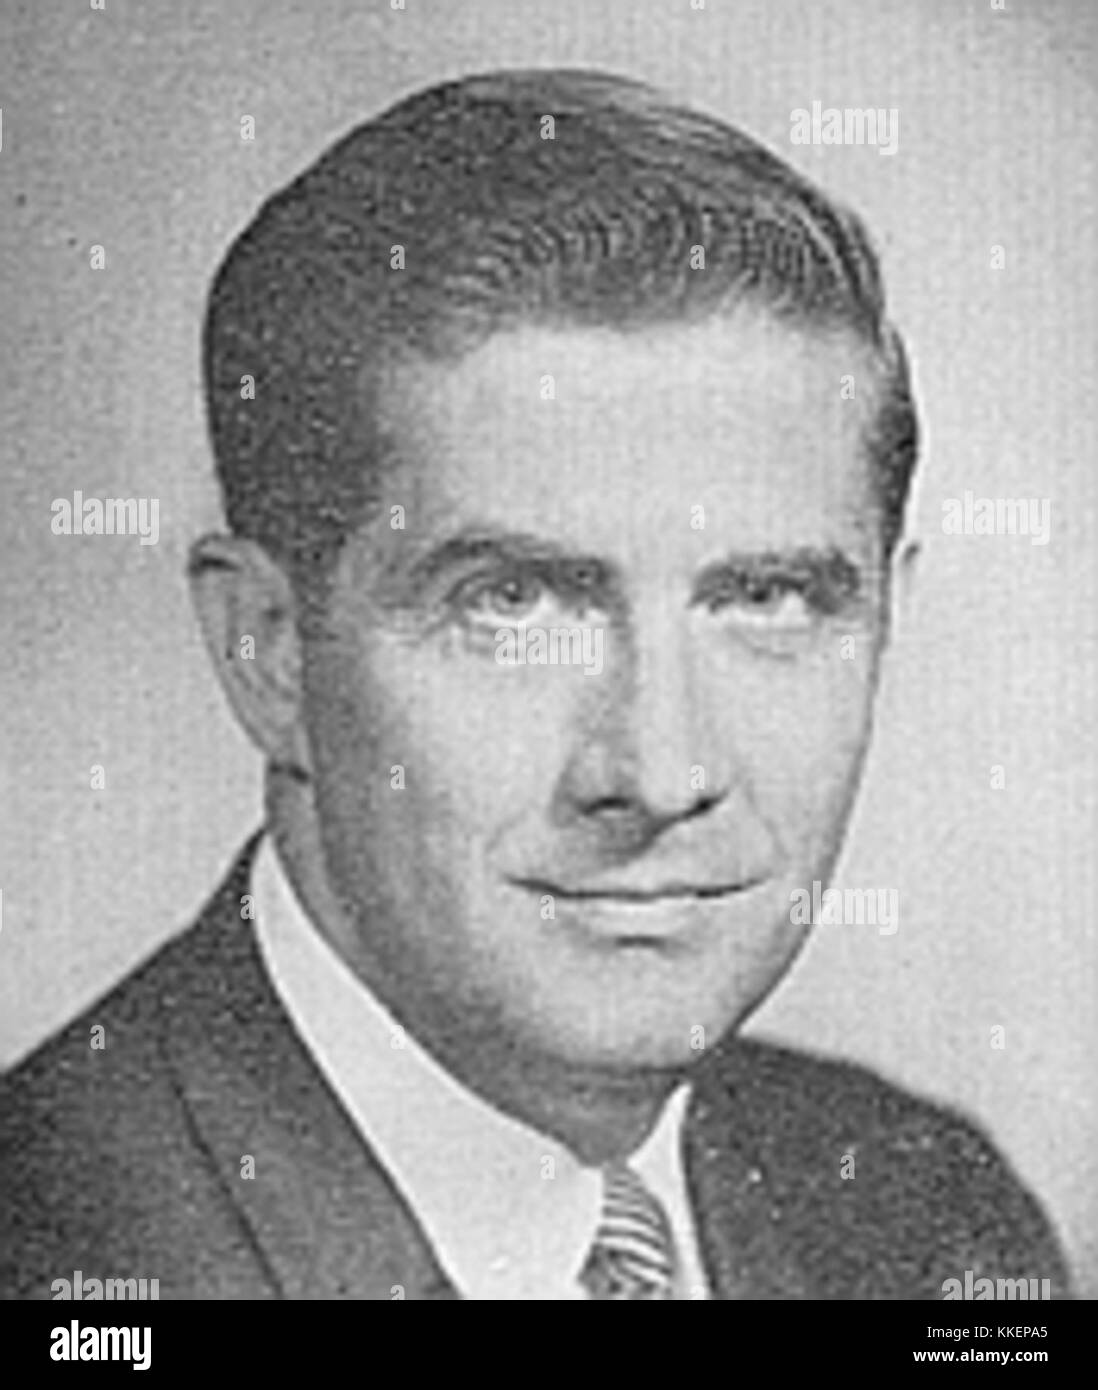 Lawrence J Hogan 93rd Congressional Pictorial Directory Stock Photo